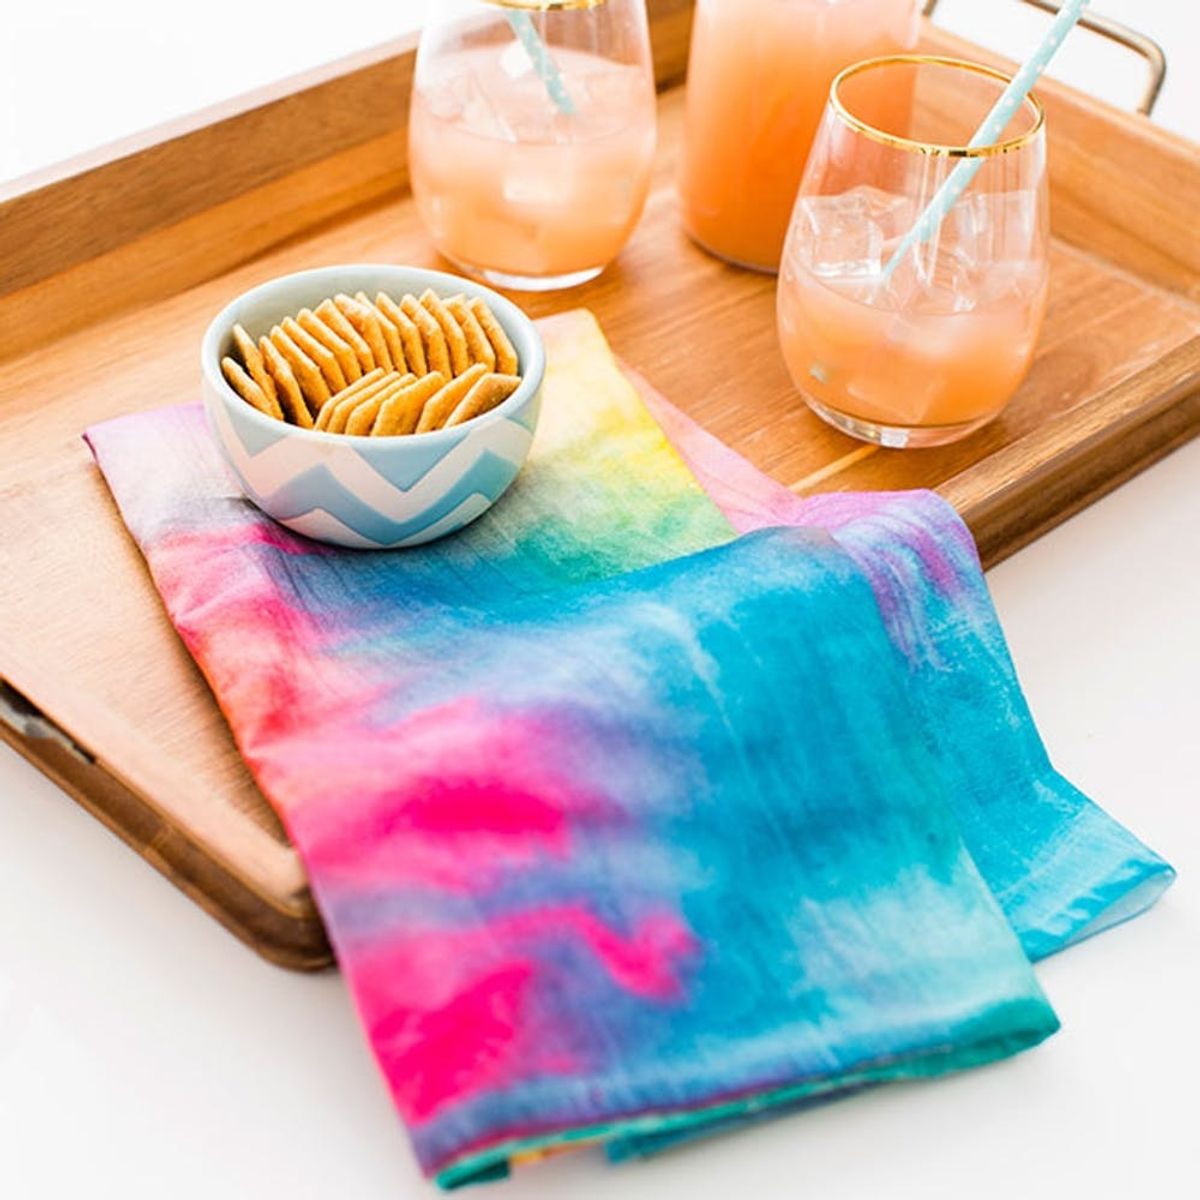 How to Make Easy Watercolor Linens That Won’t Wash Out